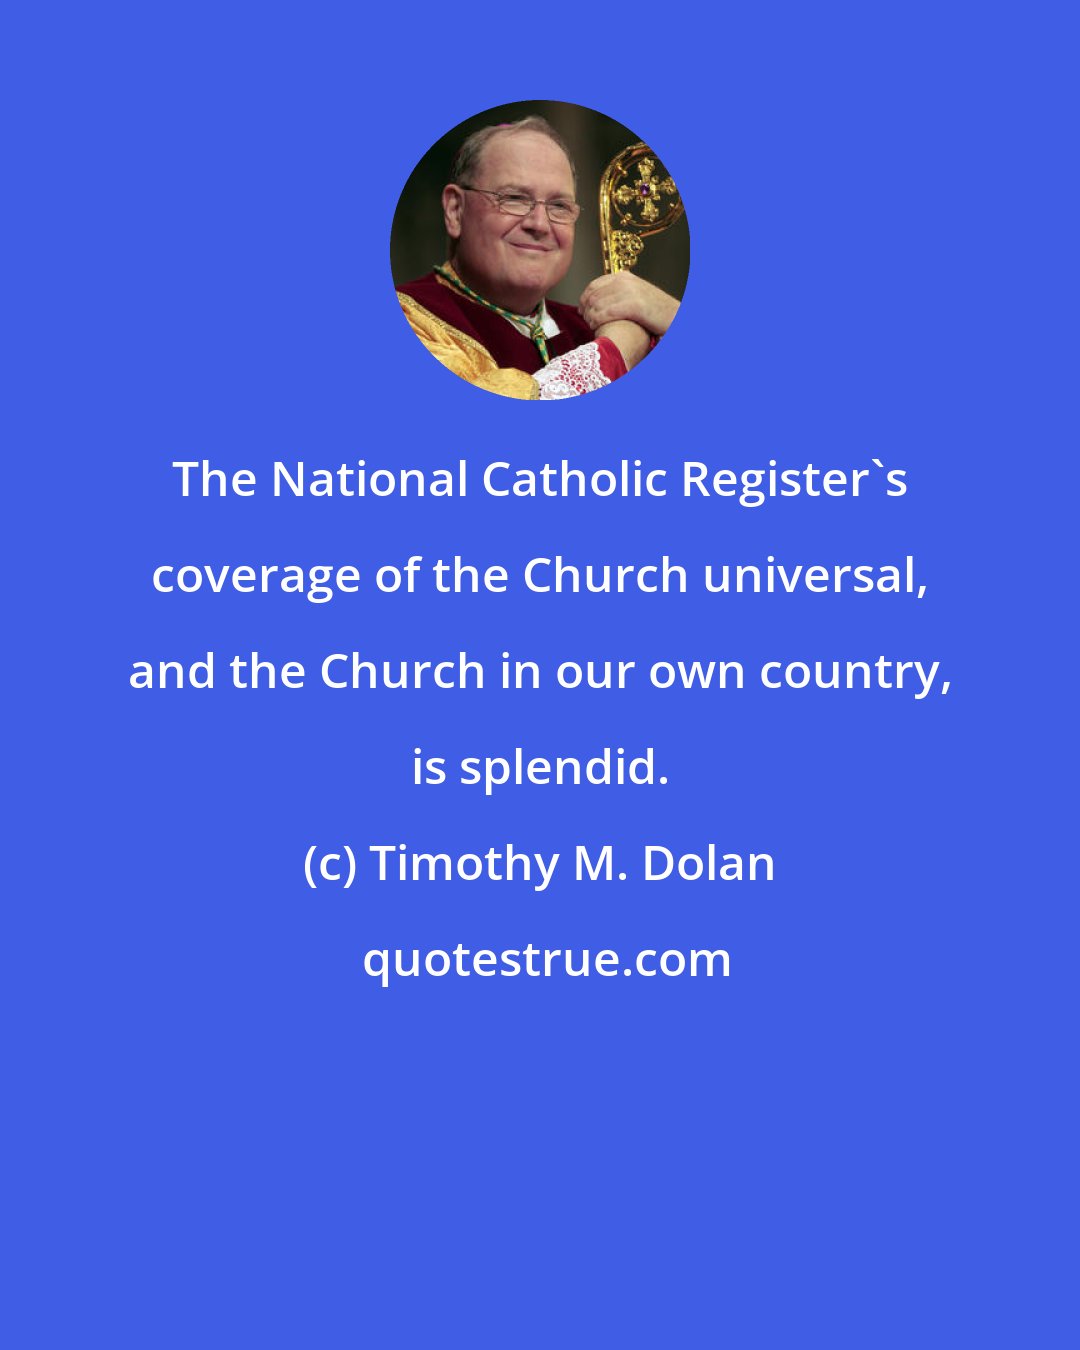 Timothy M. Dolan: The National Catholic Register's coverage of the Church universal, and the Church in our own country, is splendid.